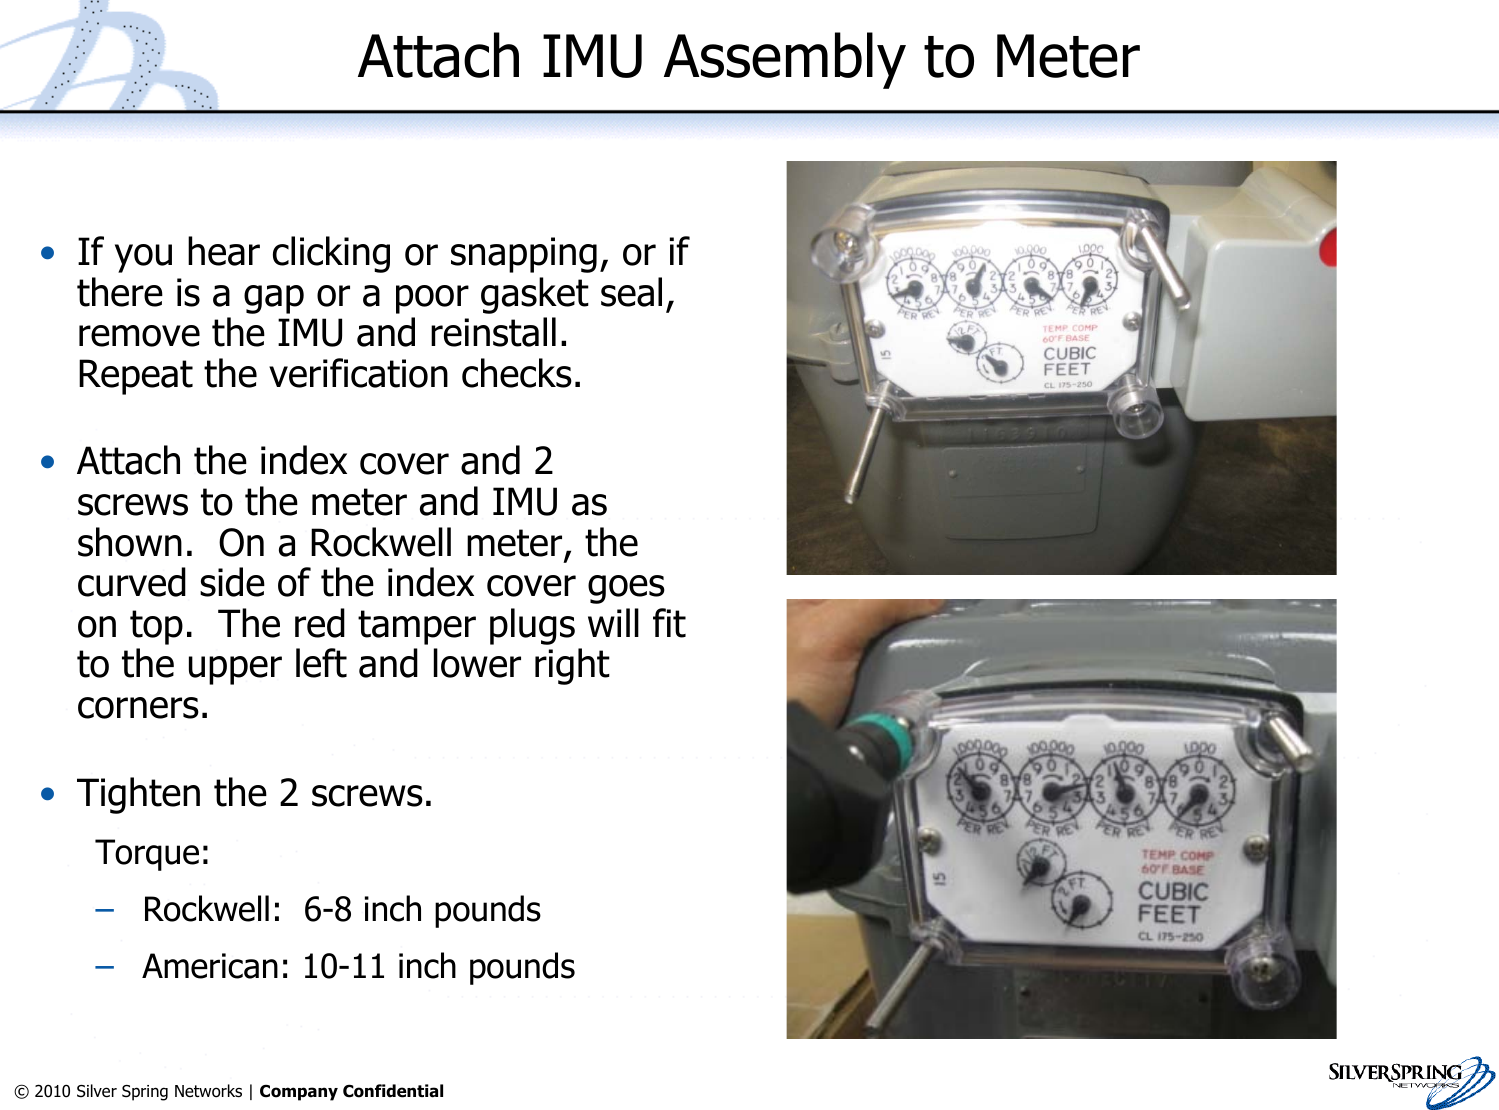 17© 2010 Silver Spring Networks | Company Confidential Attach IMU Assembly to Meter•If you hear clicking or snapping, or ifthere is a gap or a poor gasket seal,remove the IMU and reinstall.Repeat the verification checks.•Attach the index cover and 2screws to the meter and IMU asshown.  On a Rockwell meter, thecurved side of the index cover goeson top.  The red tamper plugs will fitto the upper left and lower rightcorners.•Tighten the 2 screws.Torque:–Rockwell:  6-8 inch pounds–American: 10-11 inch pounds